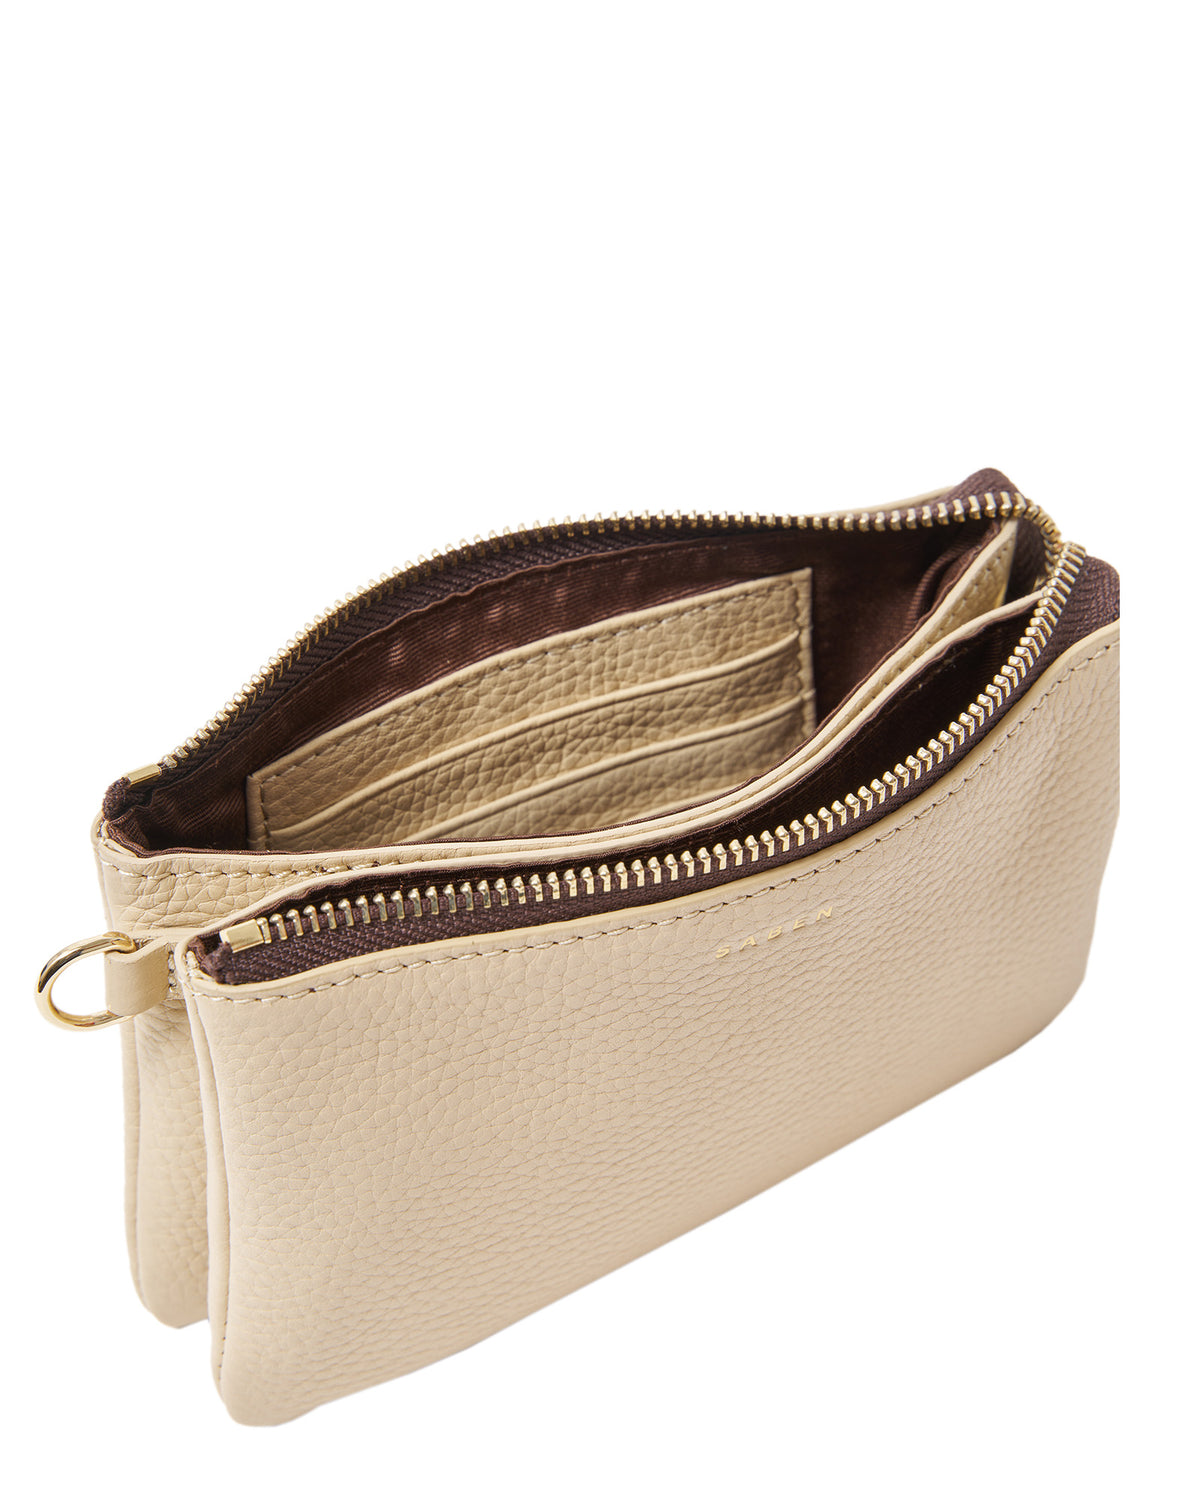 Mulberry Lily Heavy Grain Leather Top Handle Bag, Eggshell | £1095.00 |  Buchanan Galleries